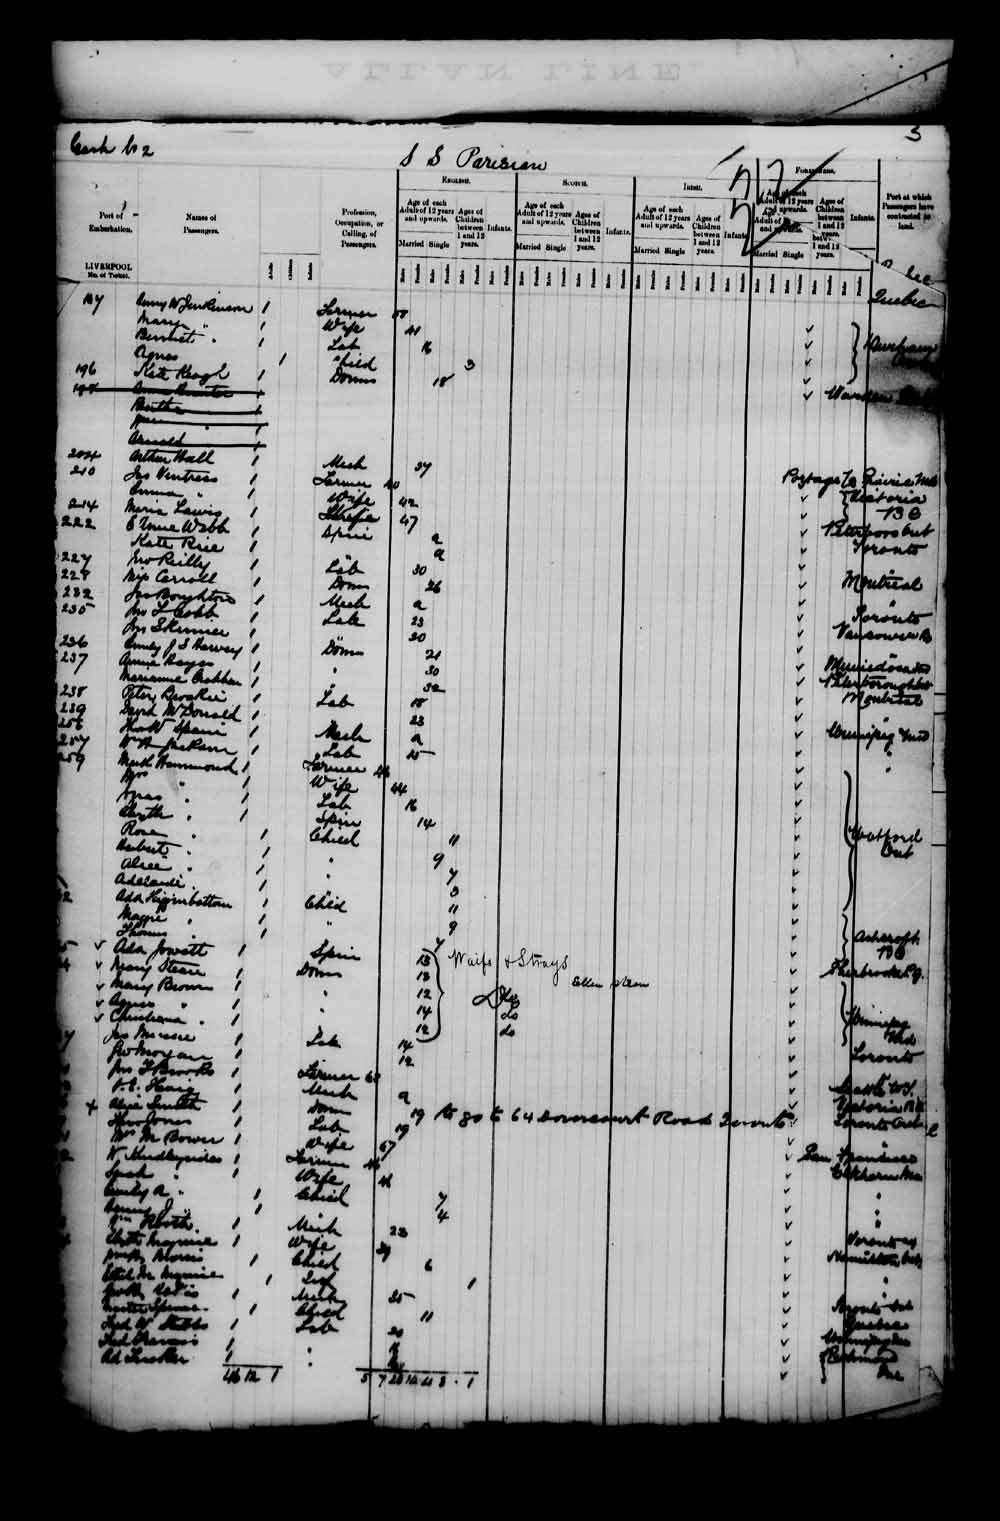 Digitized page of Passenger Lists for Image No.: e003549679